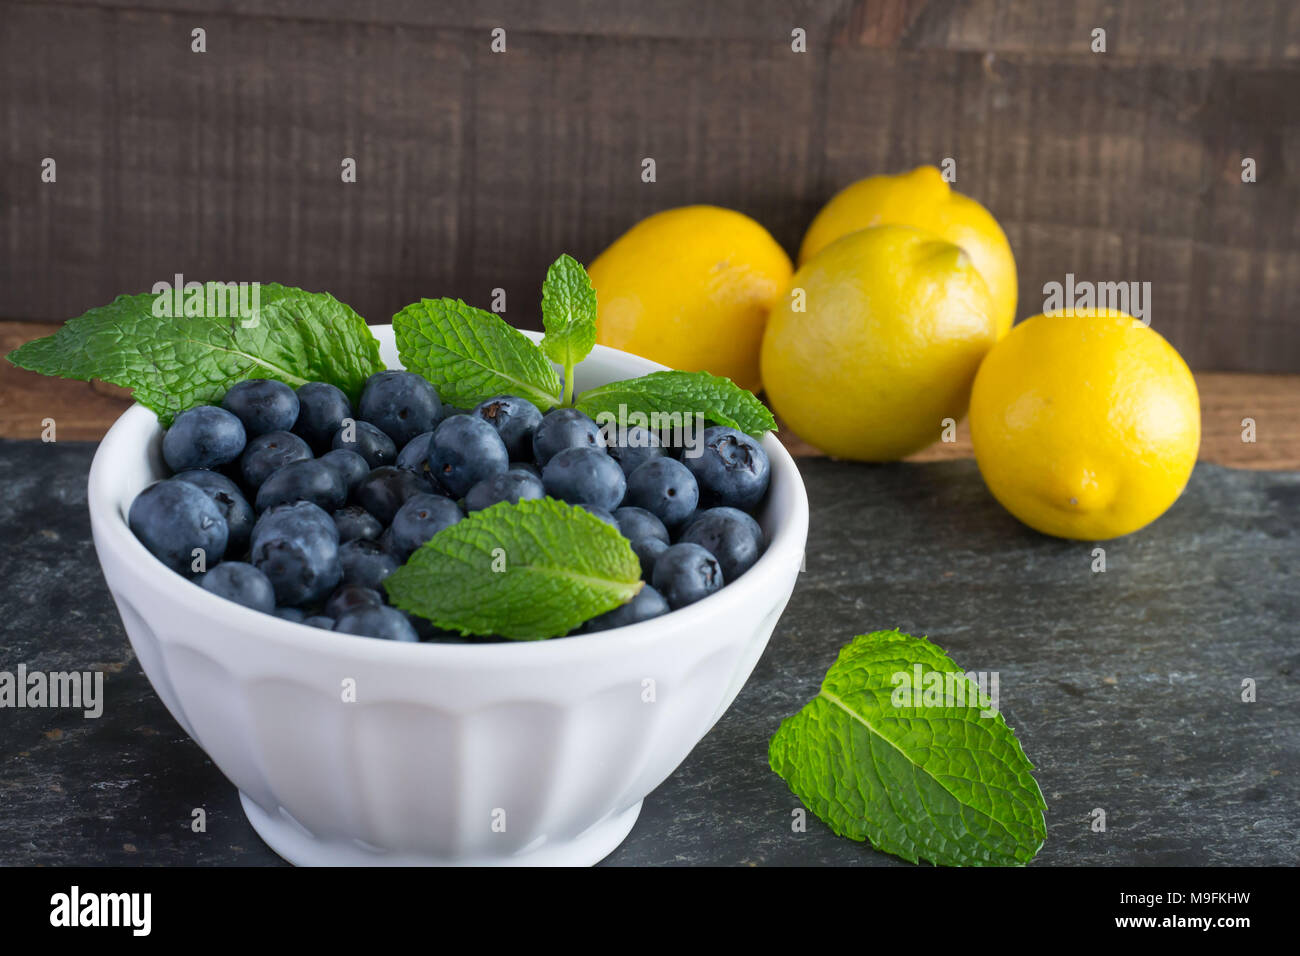 Ready for Summer Fruit? Raw, sweet blueberries in a white bowl look beautiful and taste even better. Lemon and mint add a bright contrast of color. Stock Photo